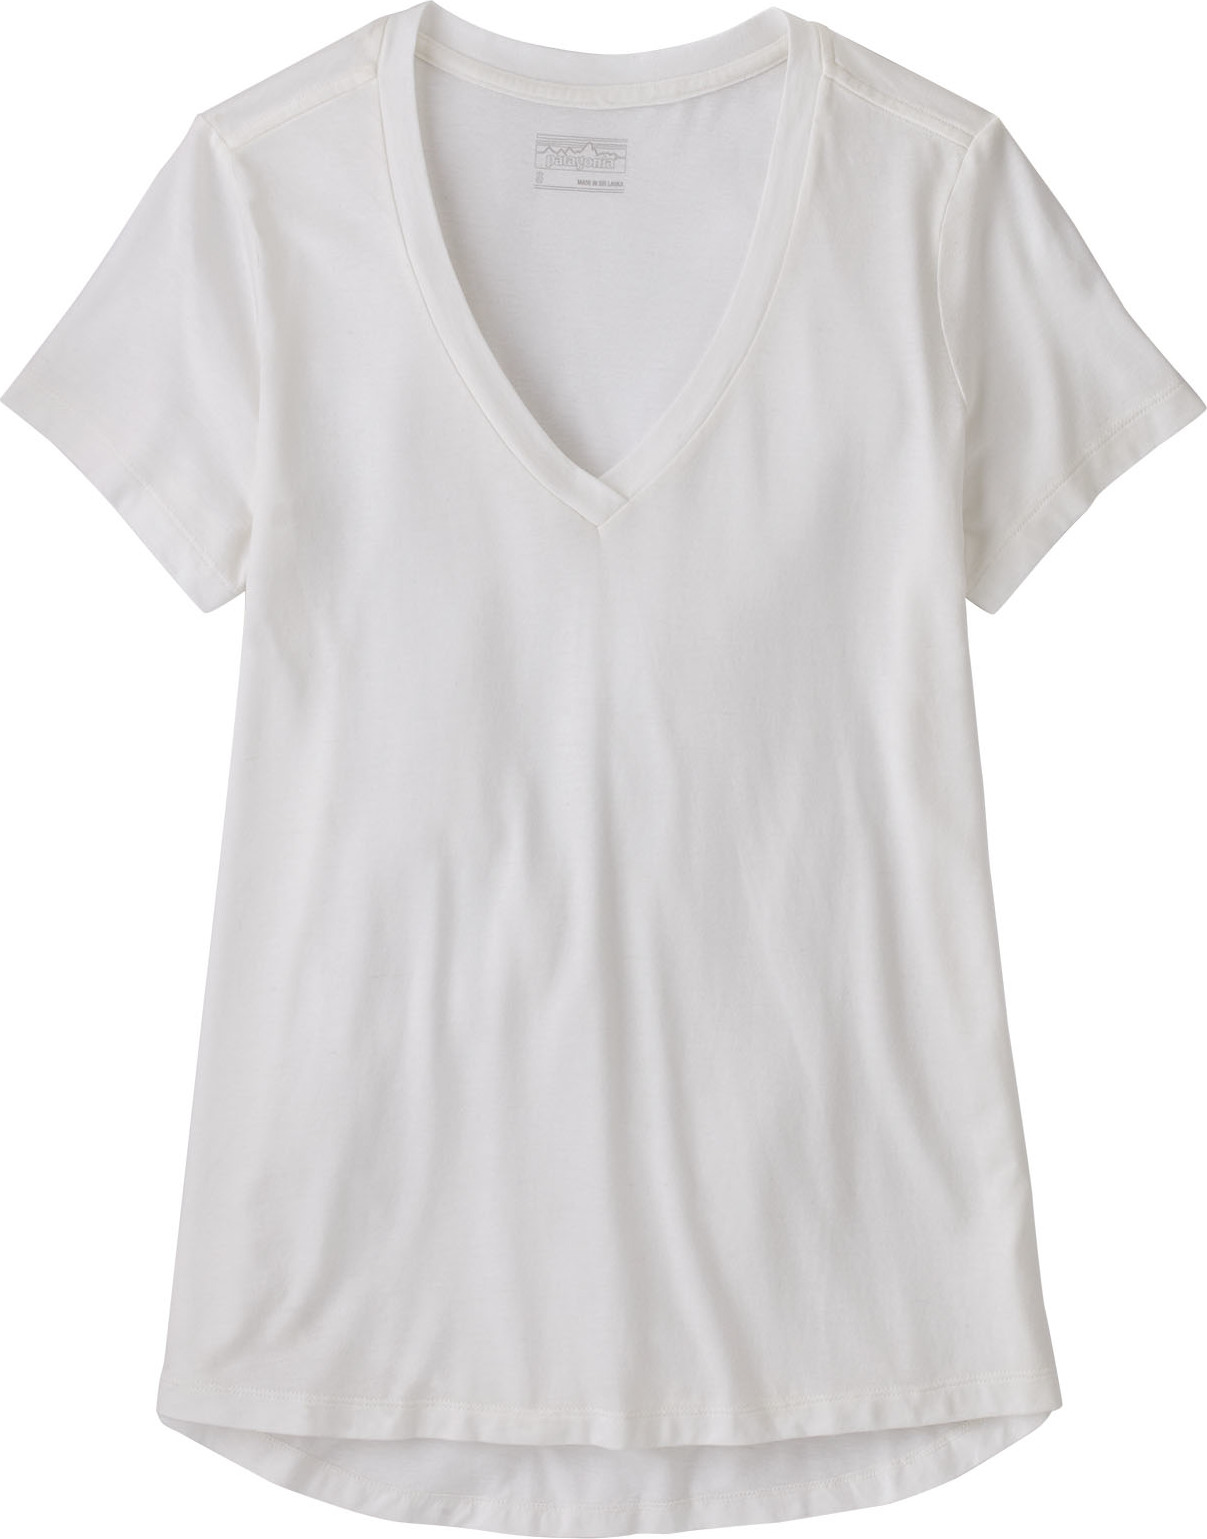 Patagonia Women’s Side Current Tee White